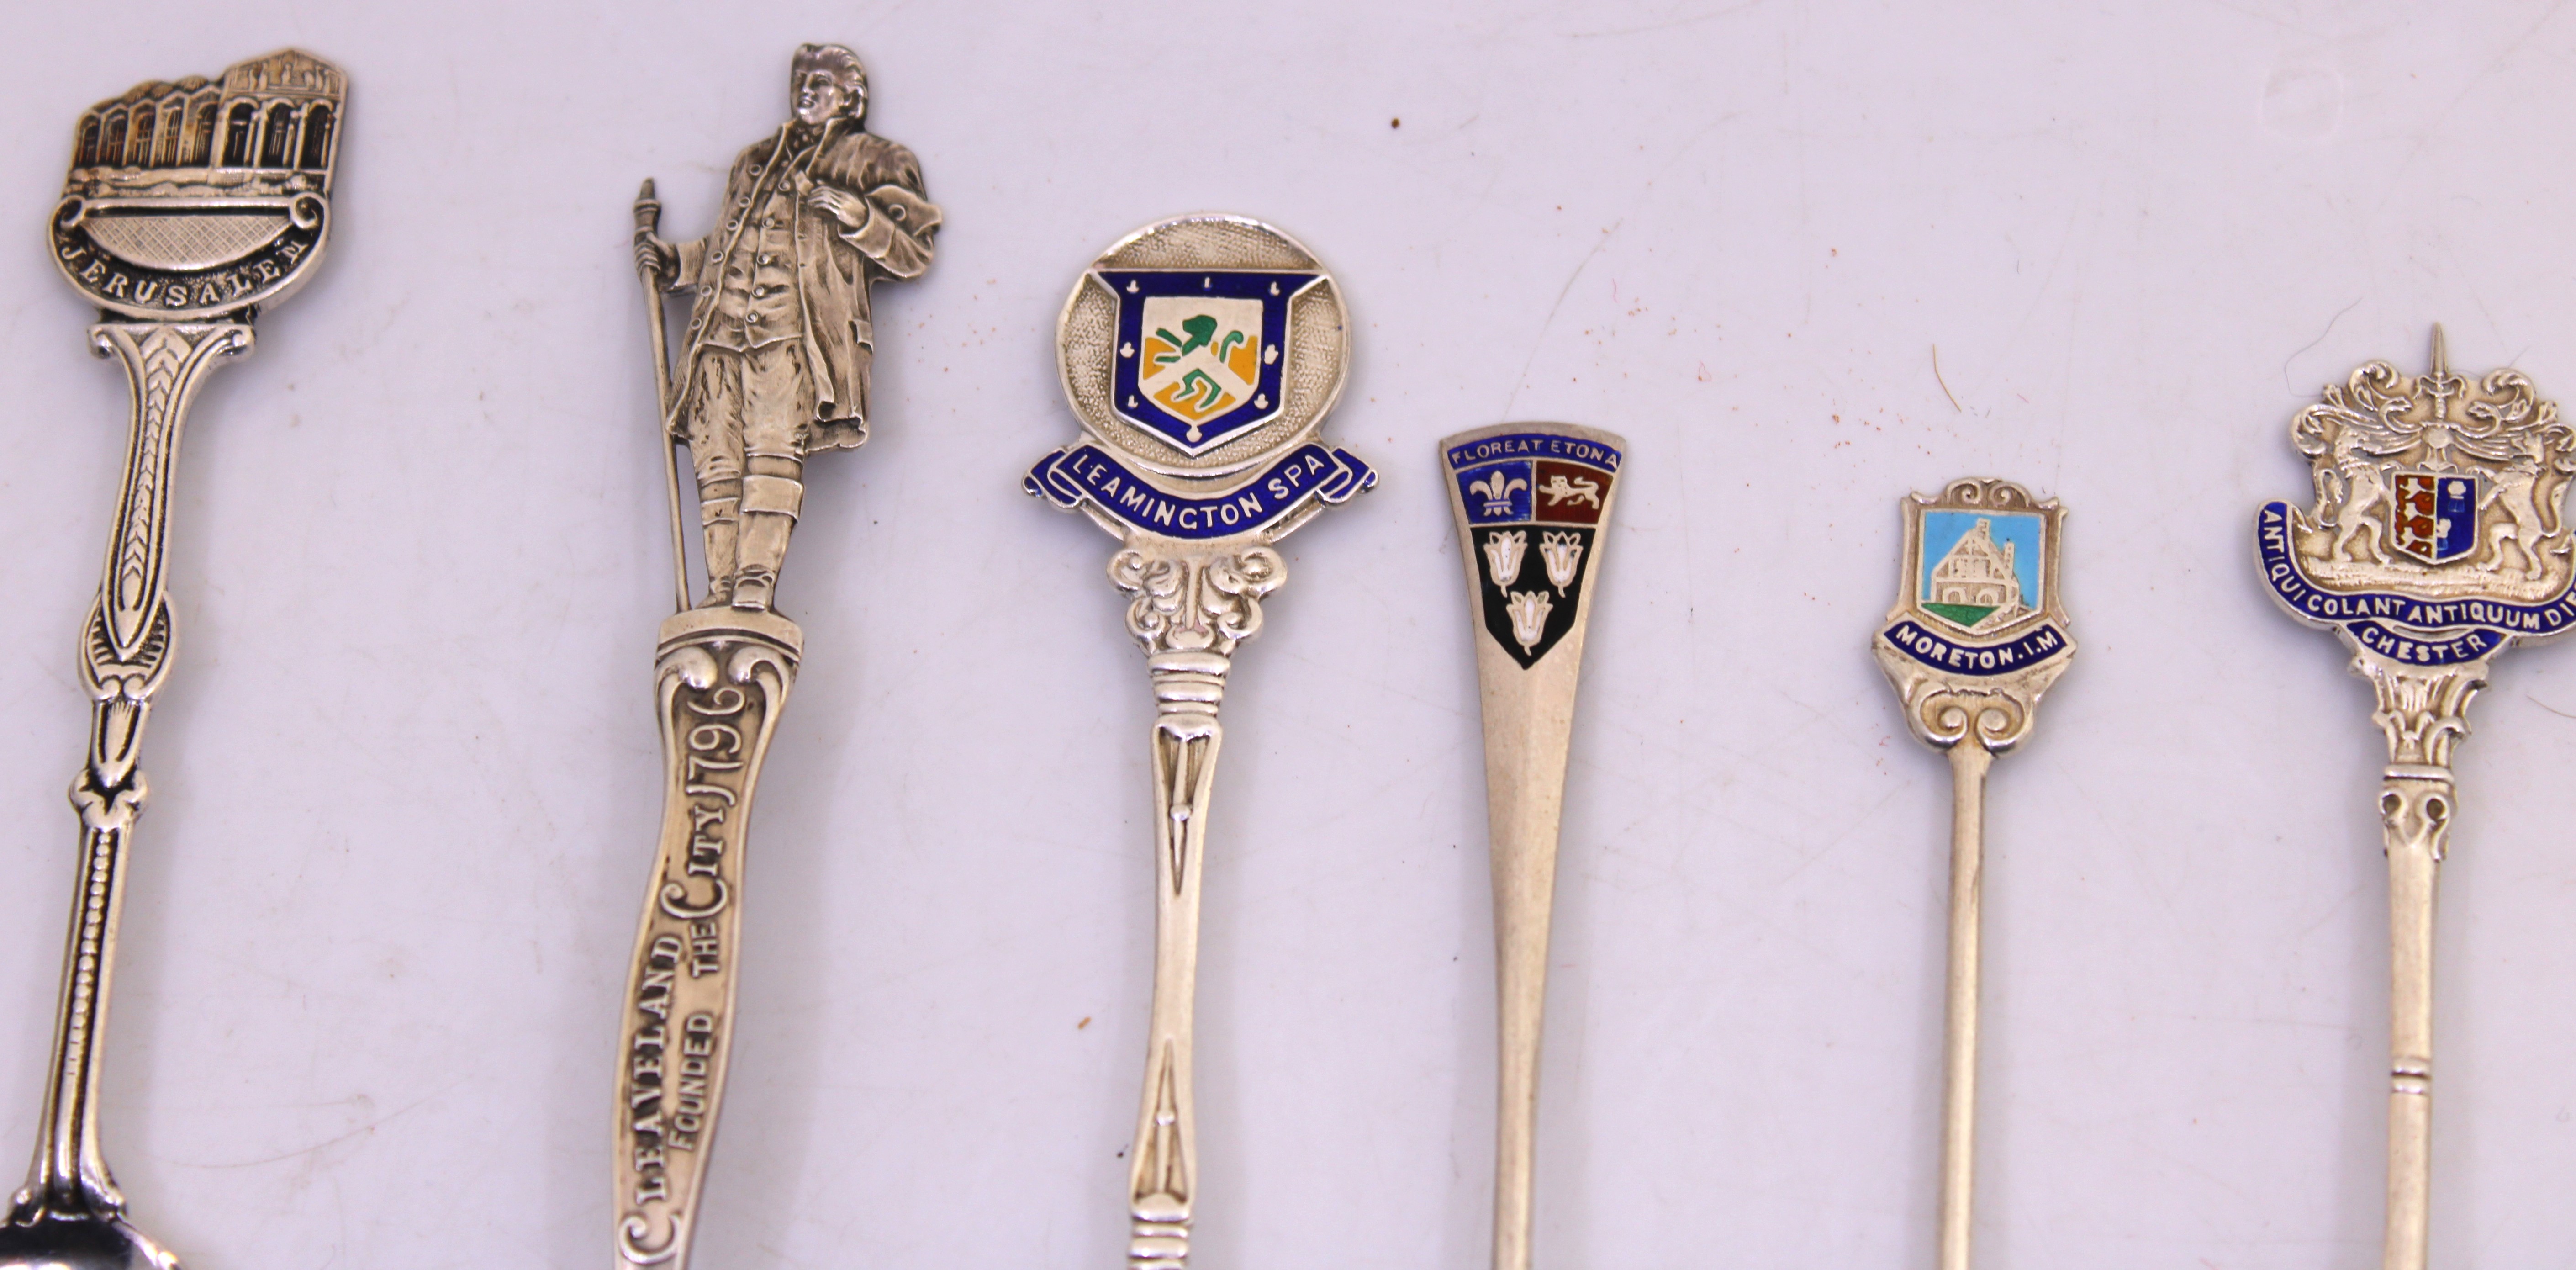 Selection of Sterling Silver Crested Teaspoons, EPNS Teaspoons, Commemorative Coins and a - Image 6 of 7